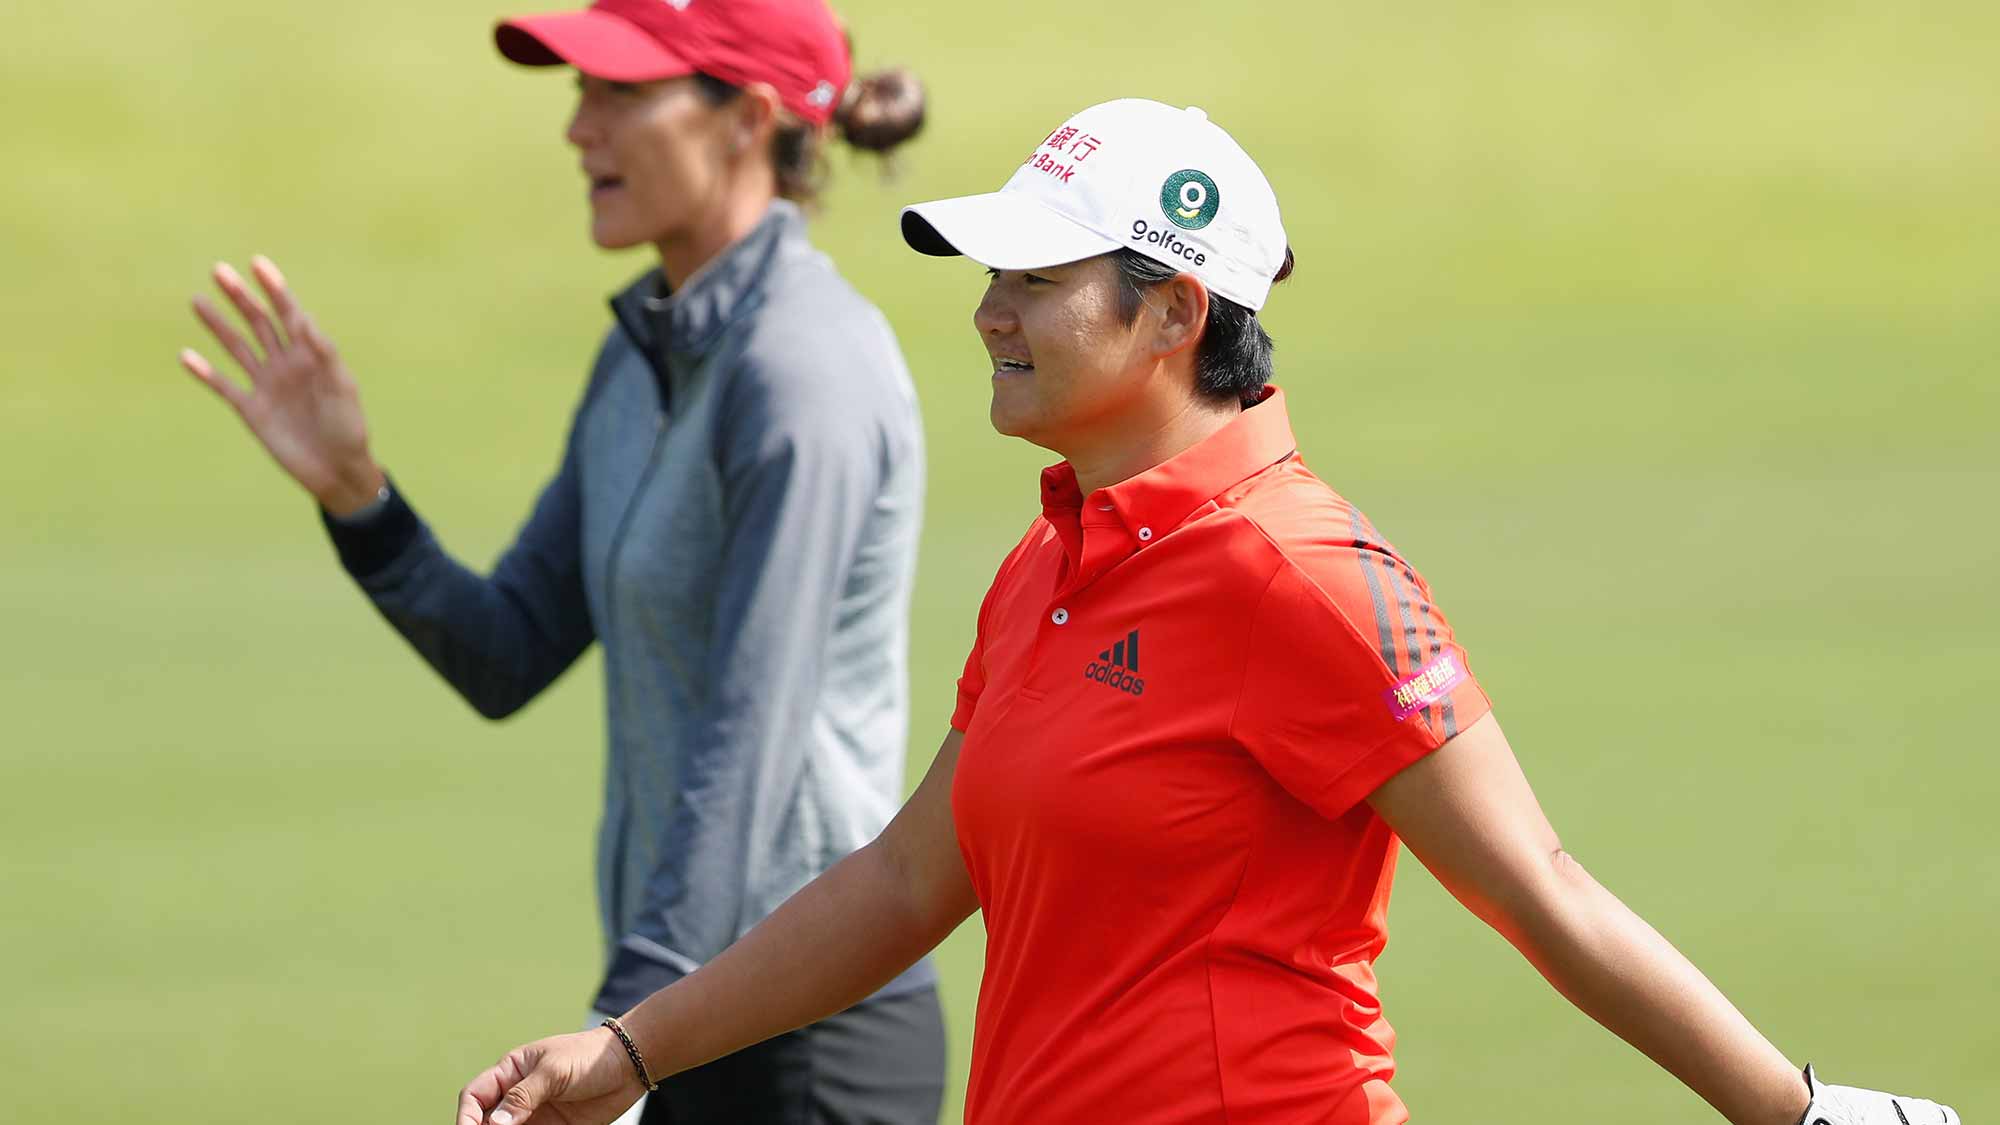 Jaye Marie Green of the United States and Yani Tseng of Chinese Taipei chat on the course during the third round of the Swinging Skirts LPGA Taiwan Championship at Ta Shee Golf & Country Club on October 27, 2018 in Taoyuan, Chinese Taipei